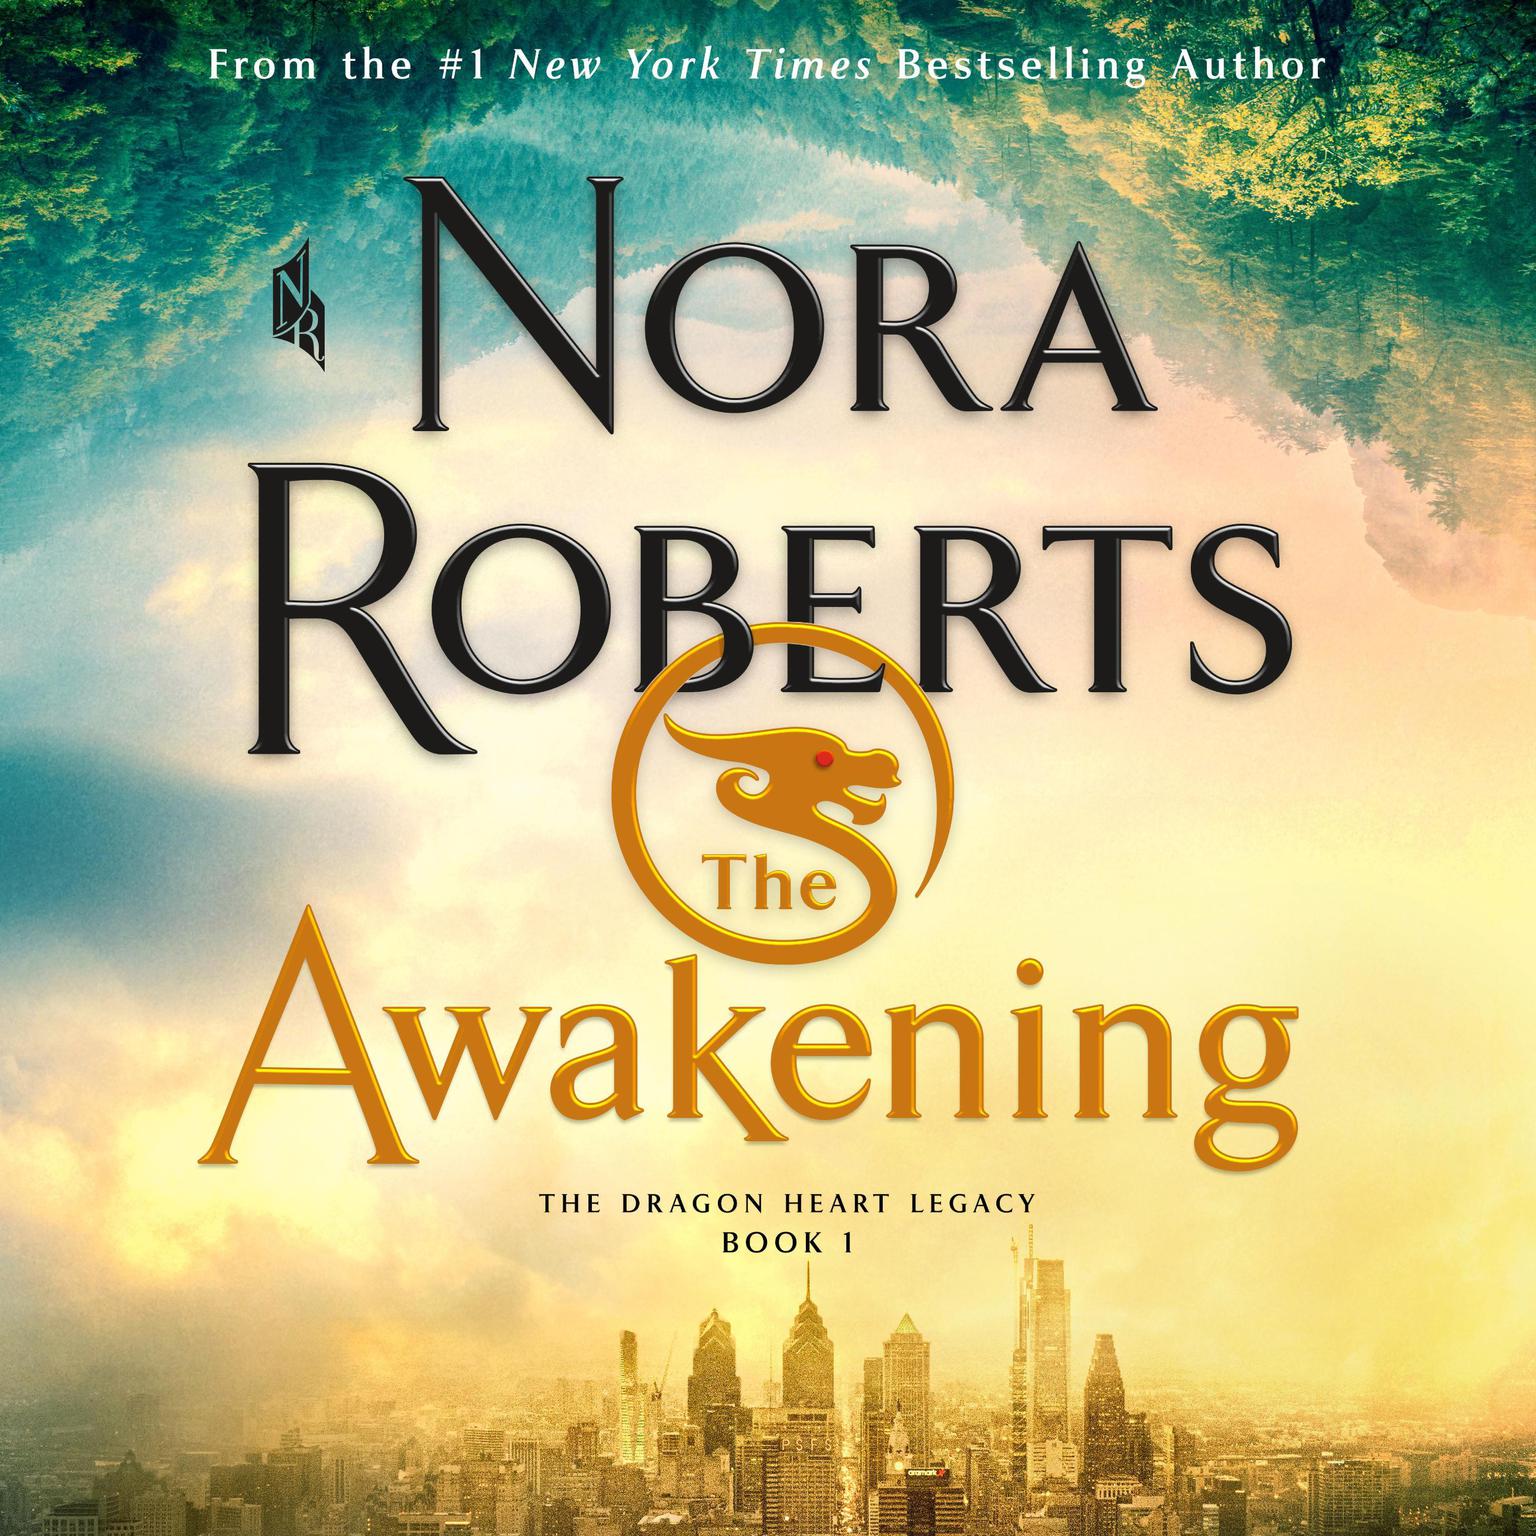 The Awakening: The Dragon Heart Legacy, Book 1 Audiobook, by Nora Roberts